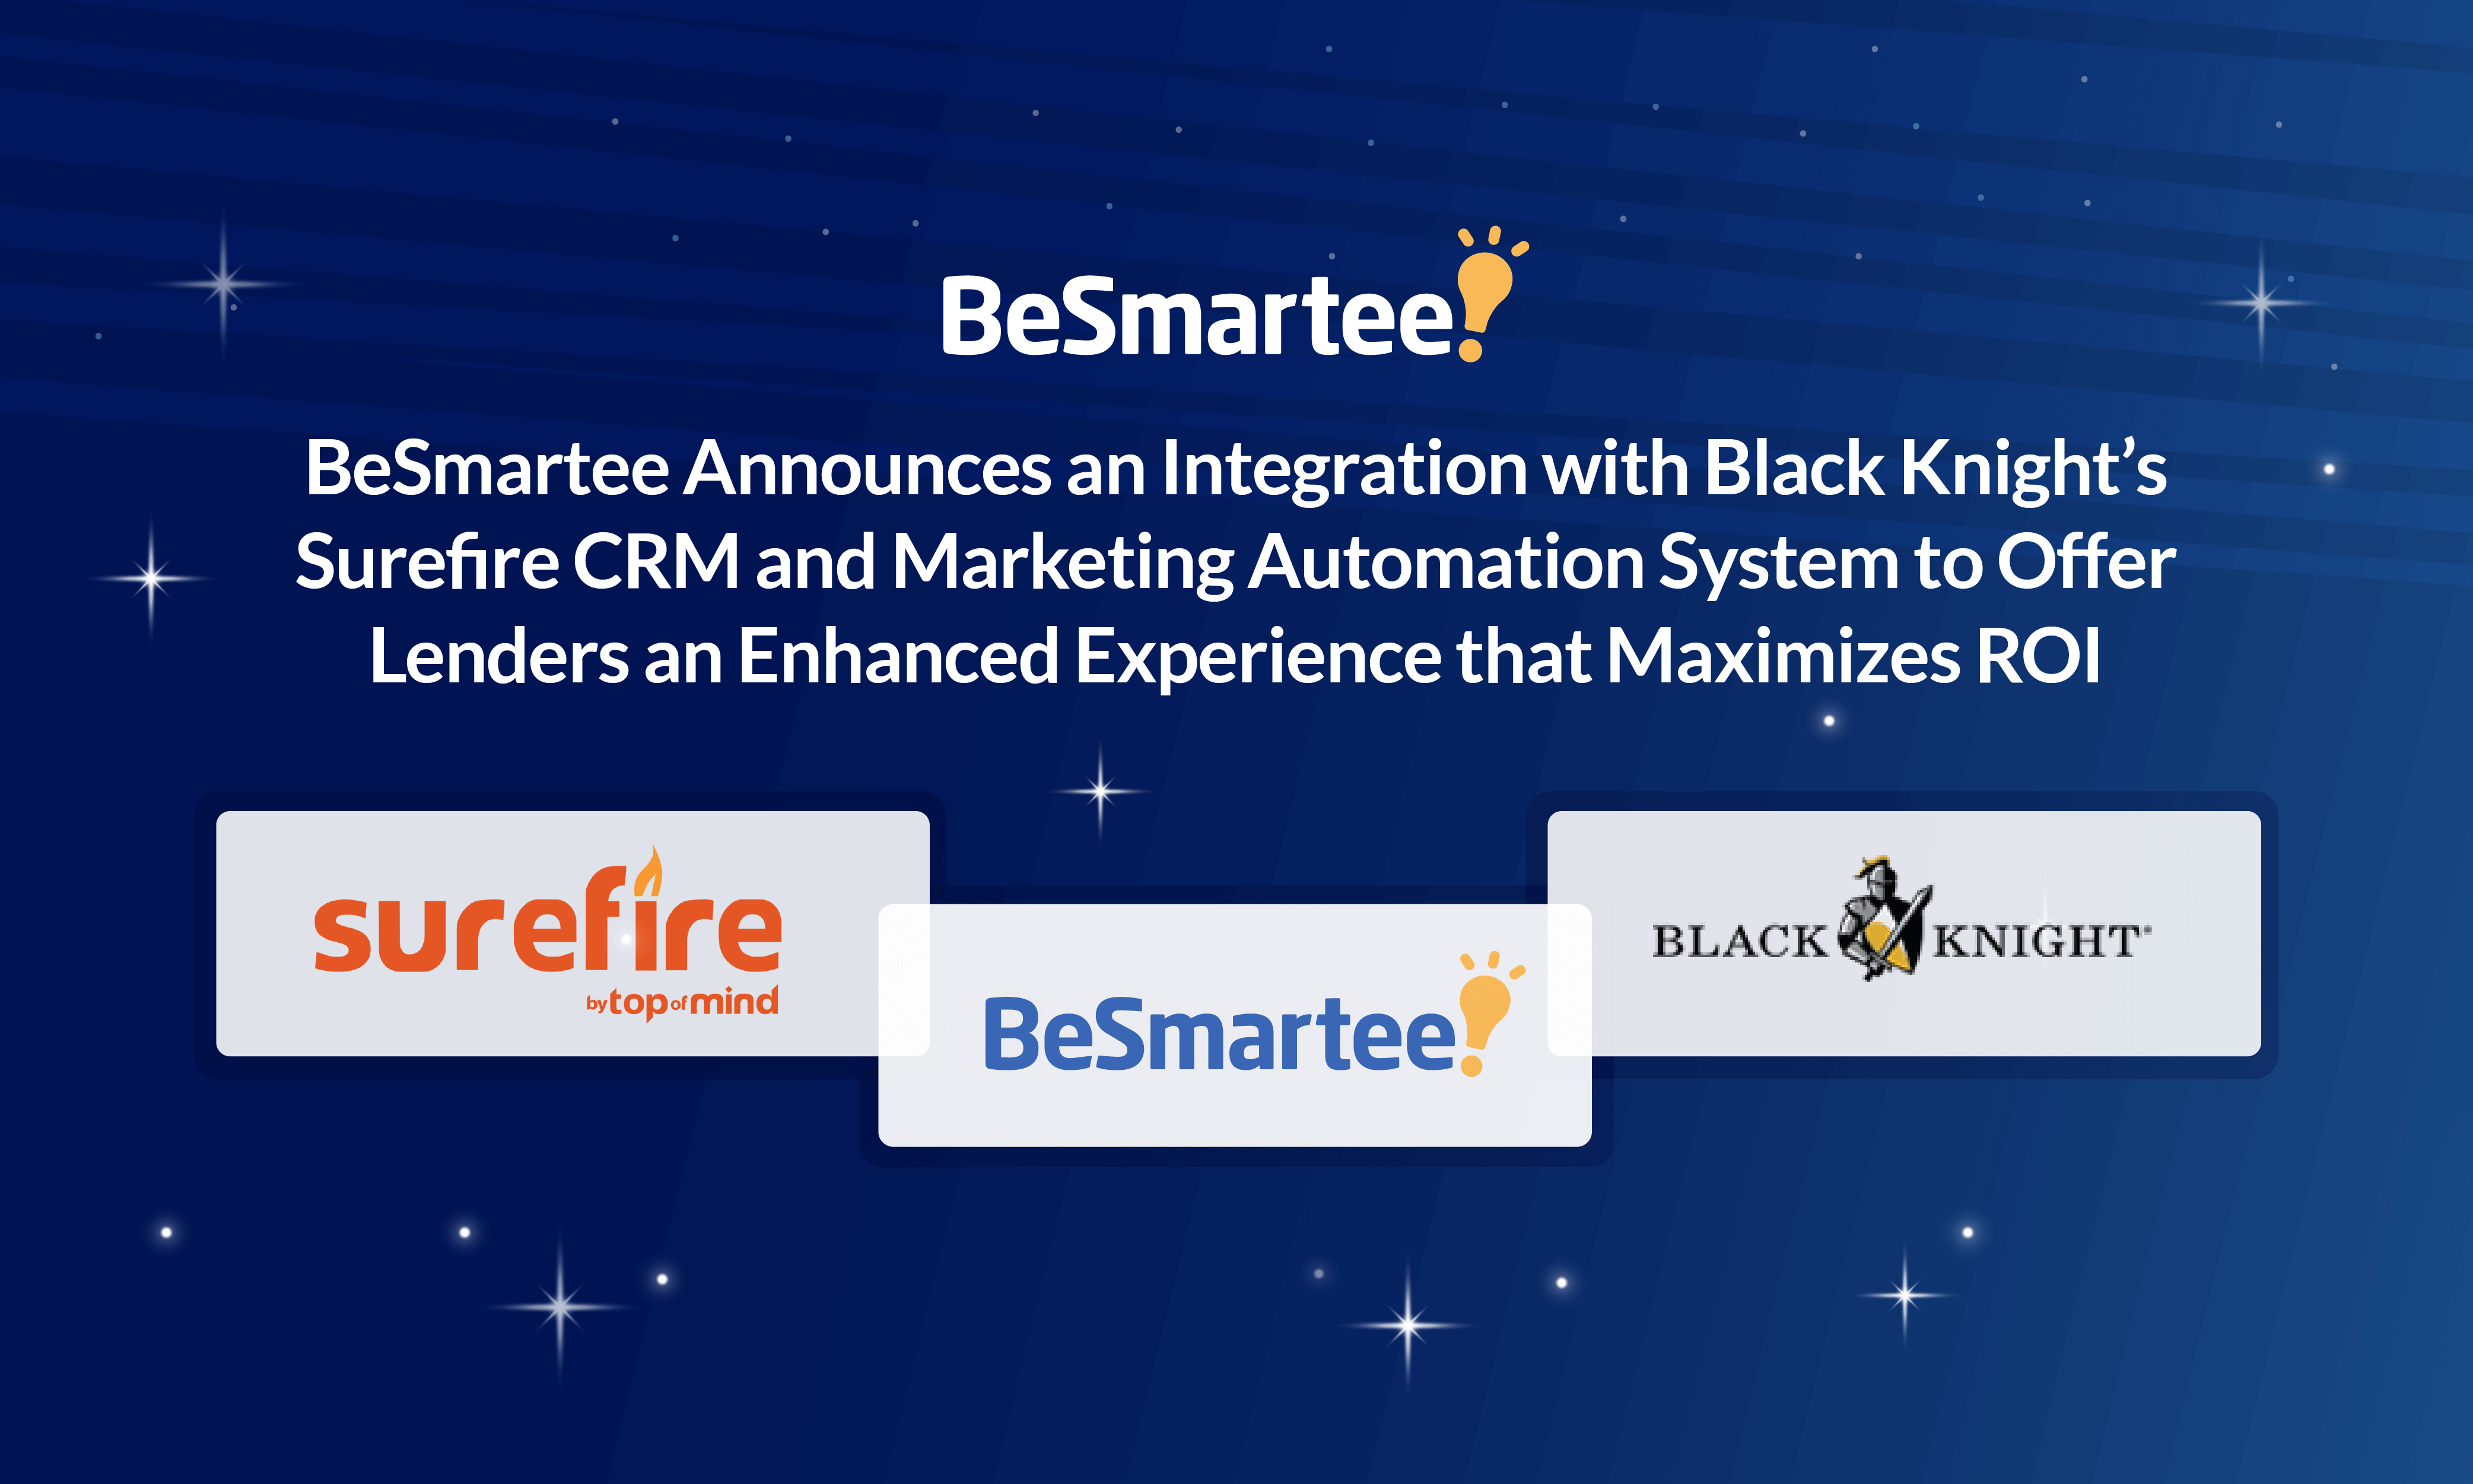 BeSmartee Announces an Integration with Black Knight’s Surefire CRM and Marketing Automation System to Offer Lenders an Enhanced Experience that Maximizes ROI